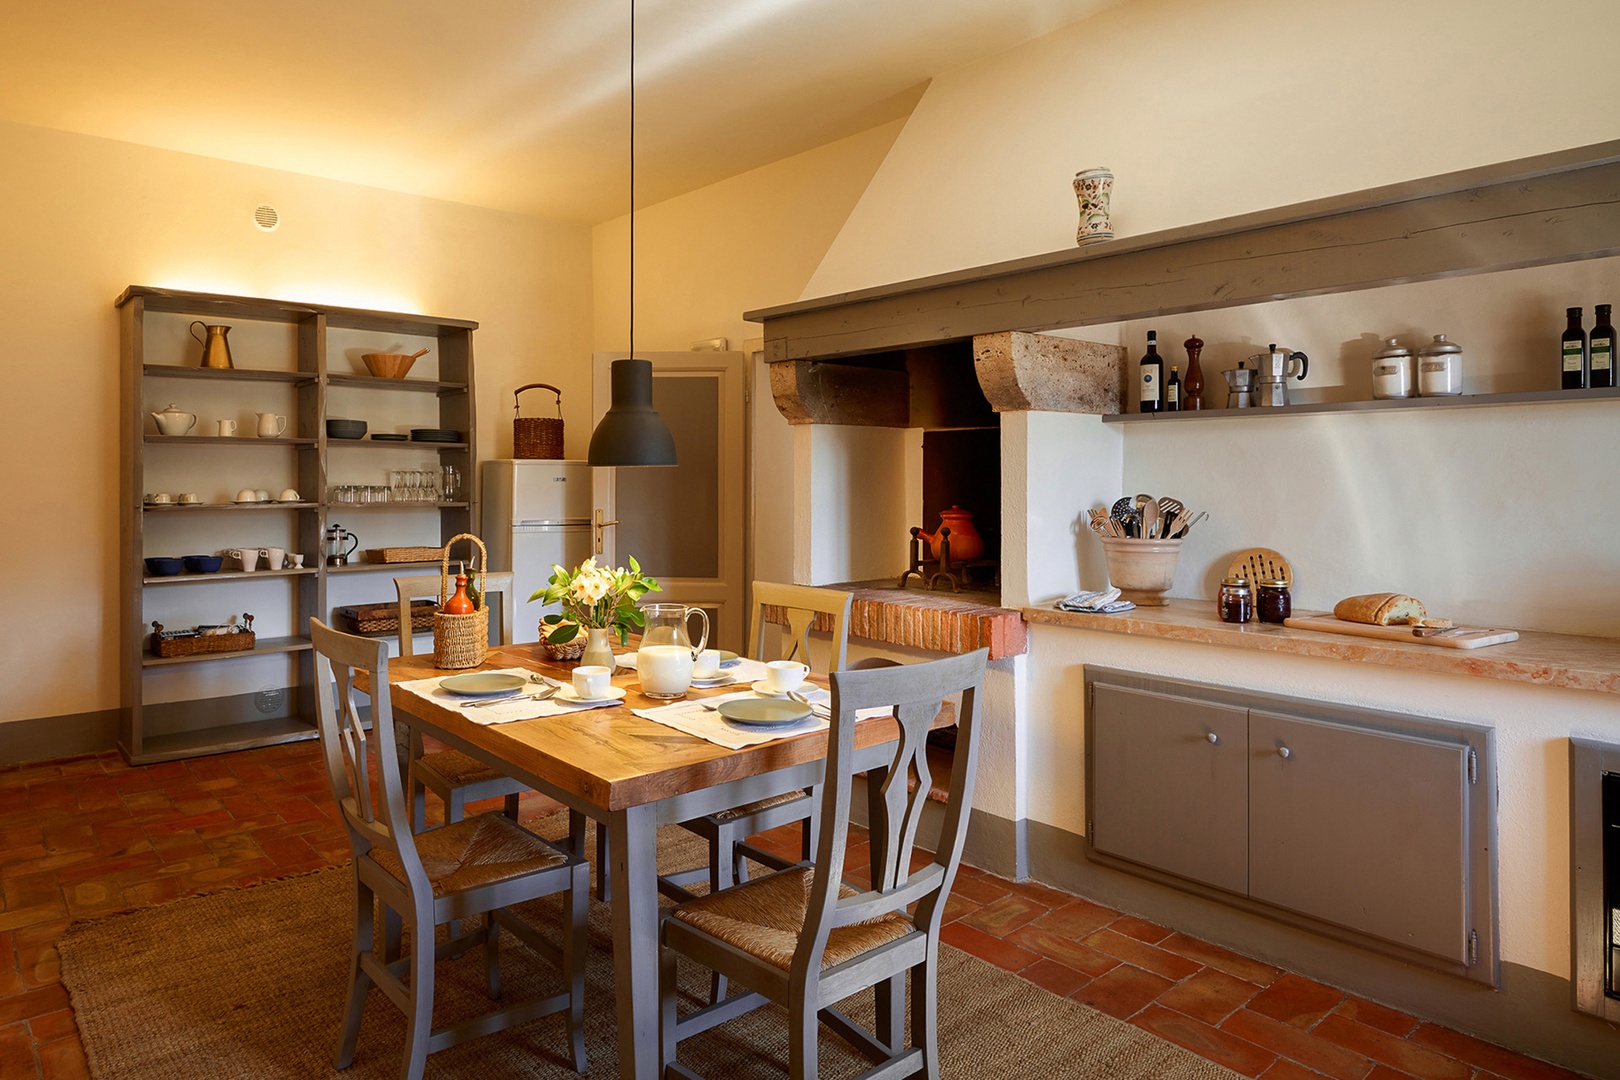 This country kitchen even has an old wood burning oven for character.